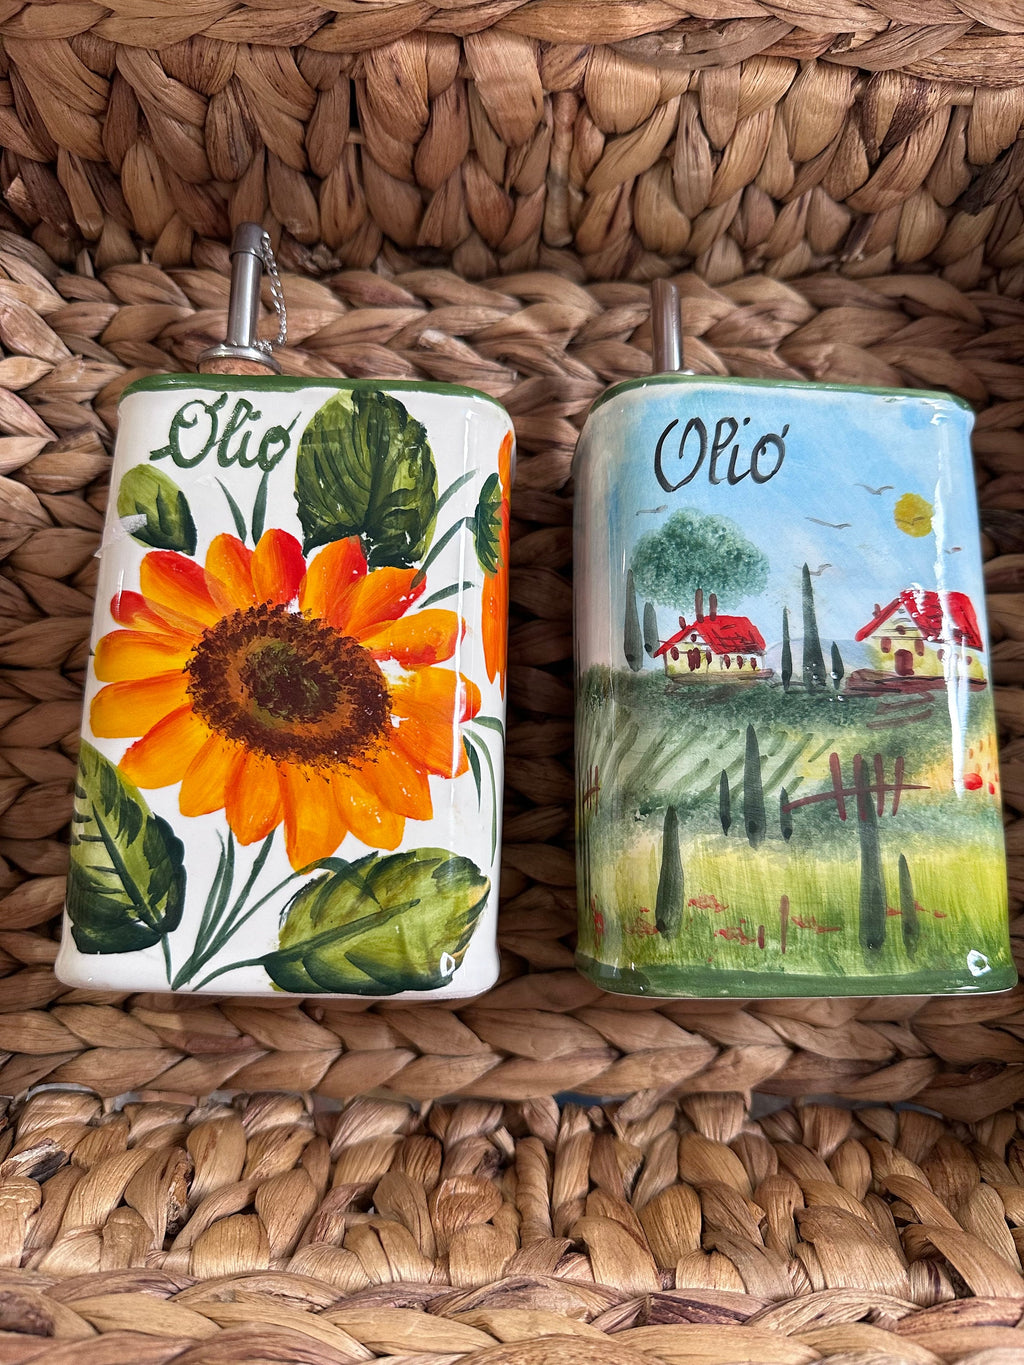 Olive Oil Cans